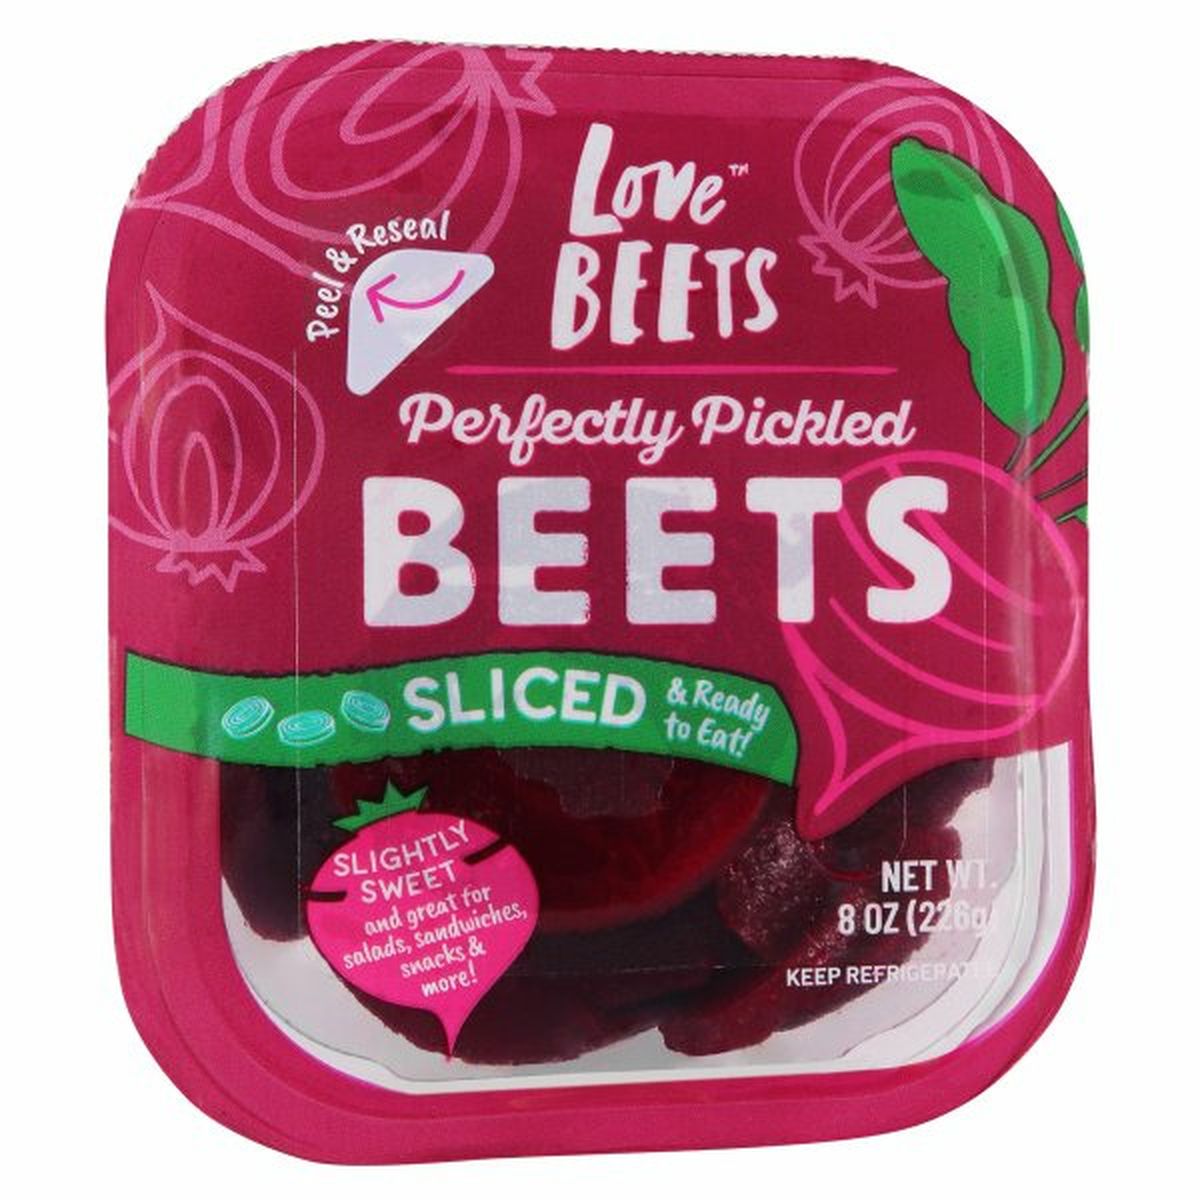 Calories in Love Beets Beets, Perfectly Pickled, Sliced